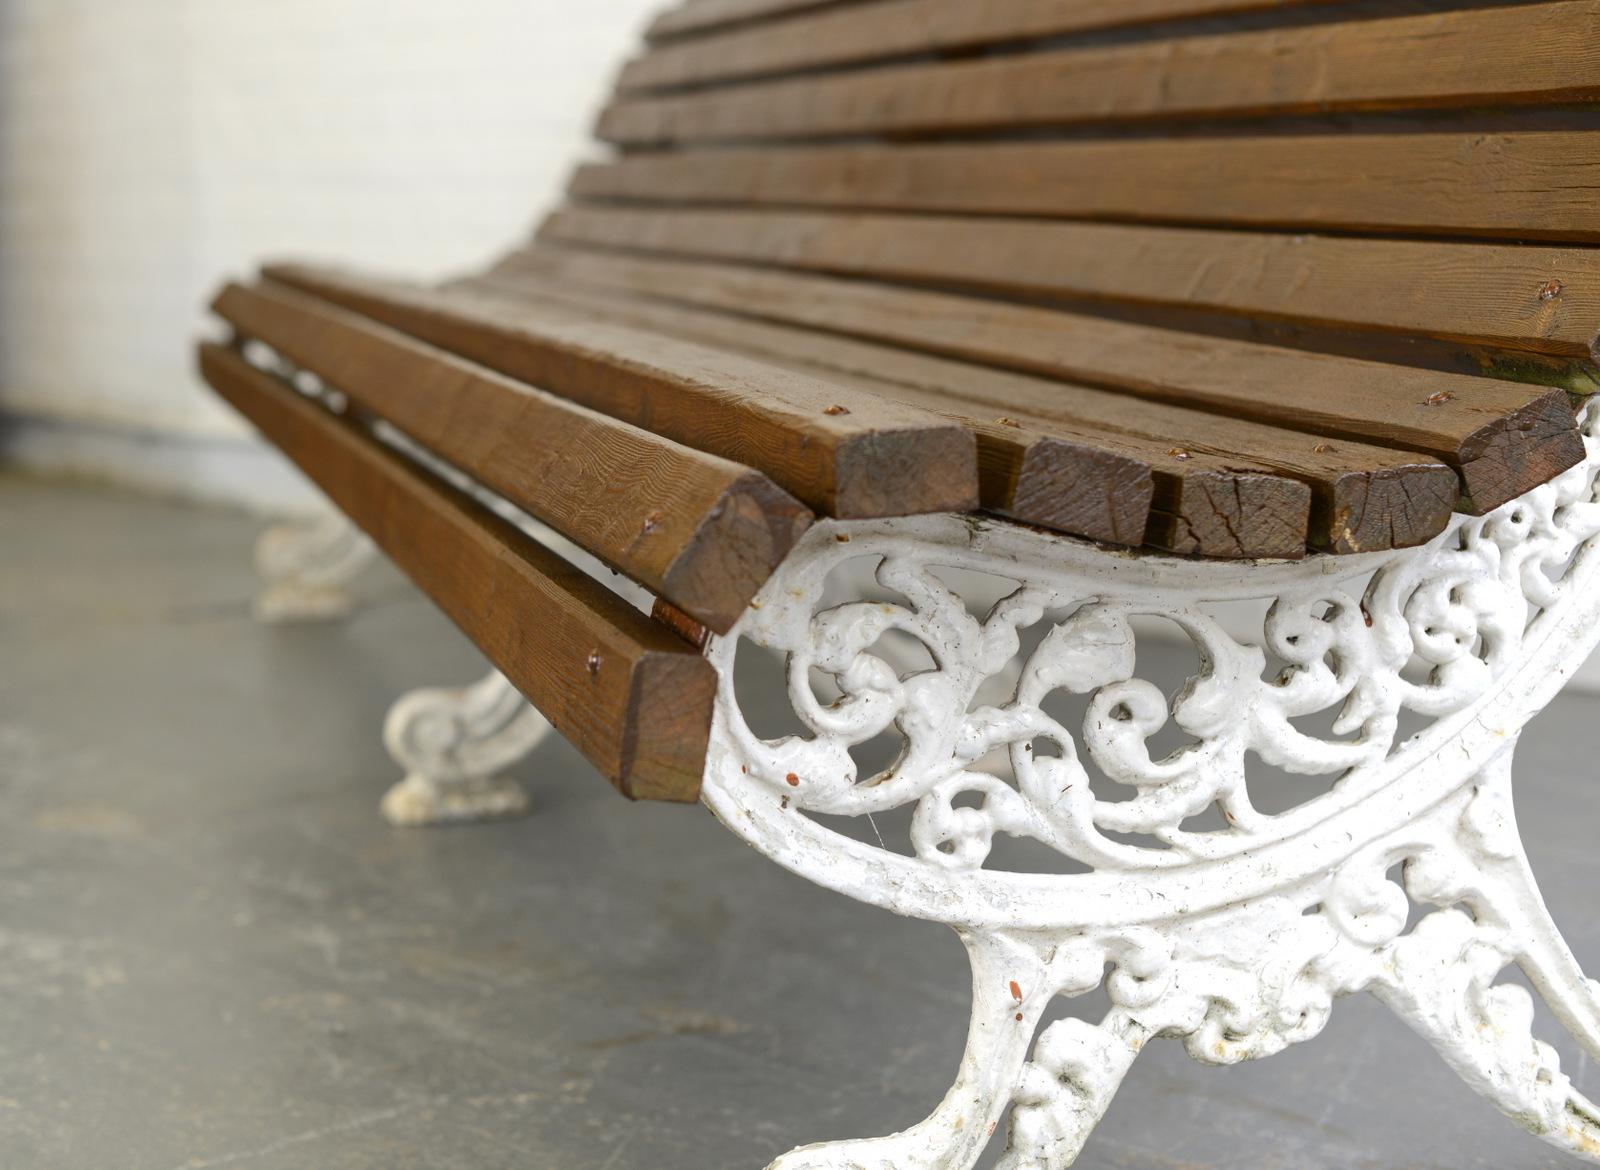 Victorian English Country House bench, circa 1860s

 3 ornate cast iron legs
- Wooden slats
- English ~ 1860s
- 245 cm long x 91 cm deep x 84 cm tall
- 48cm from floor to seat

Condition report

The slats have been treated and given a coat